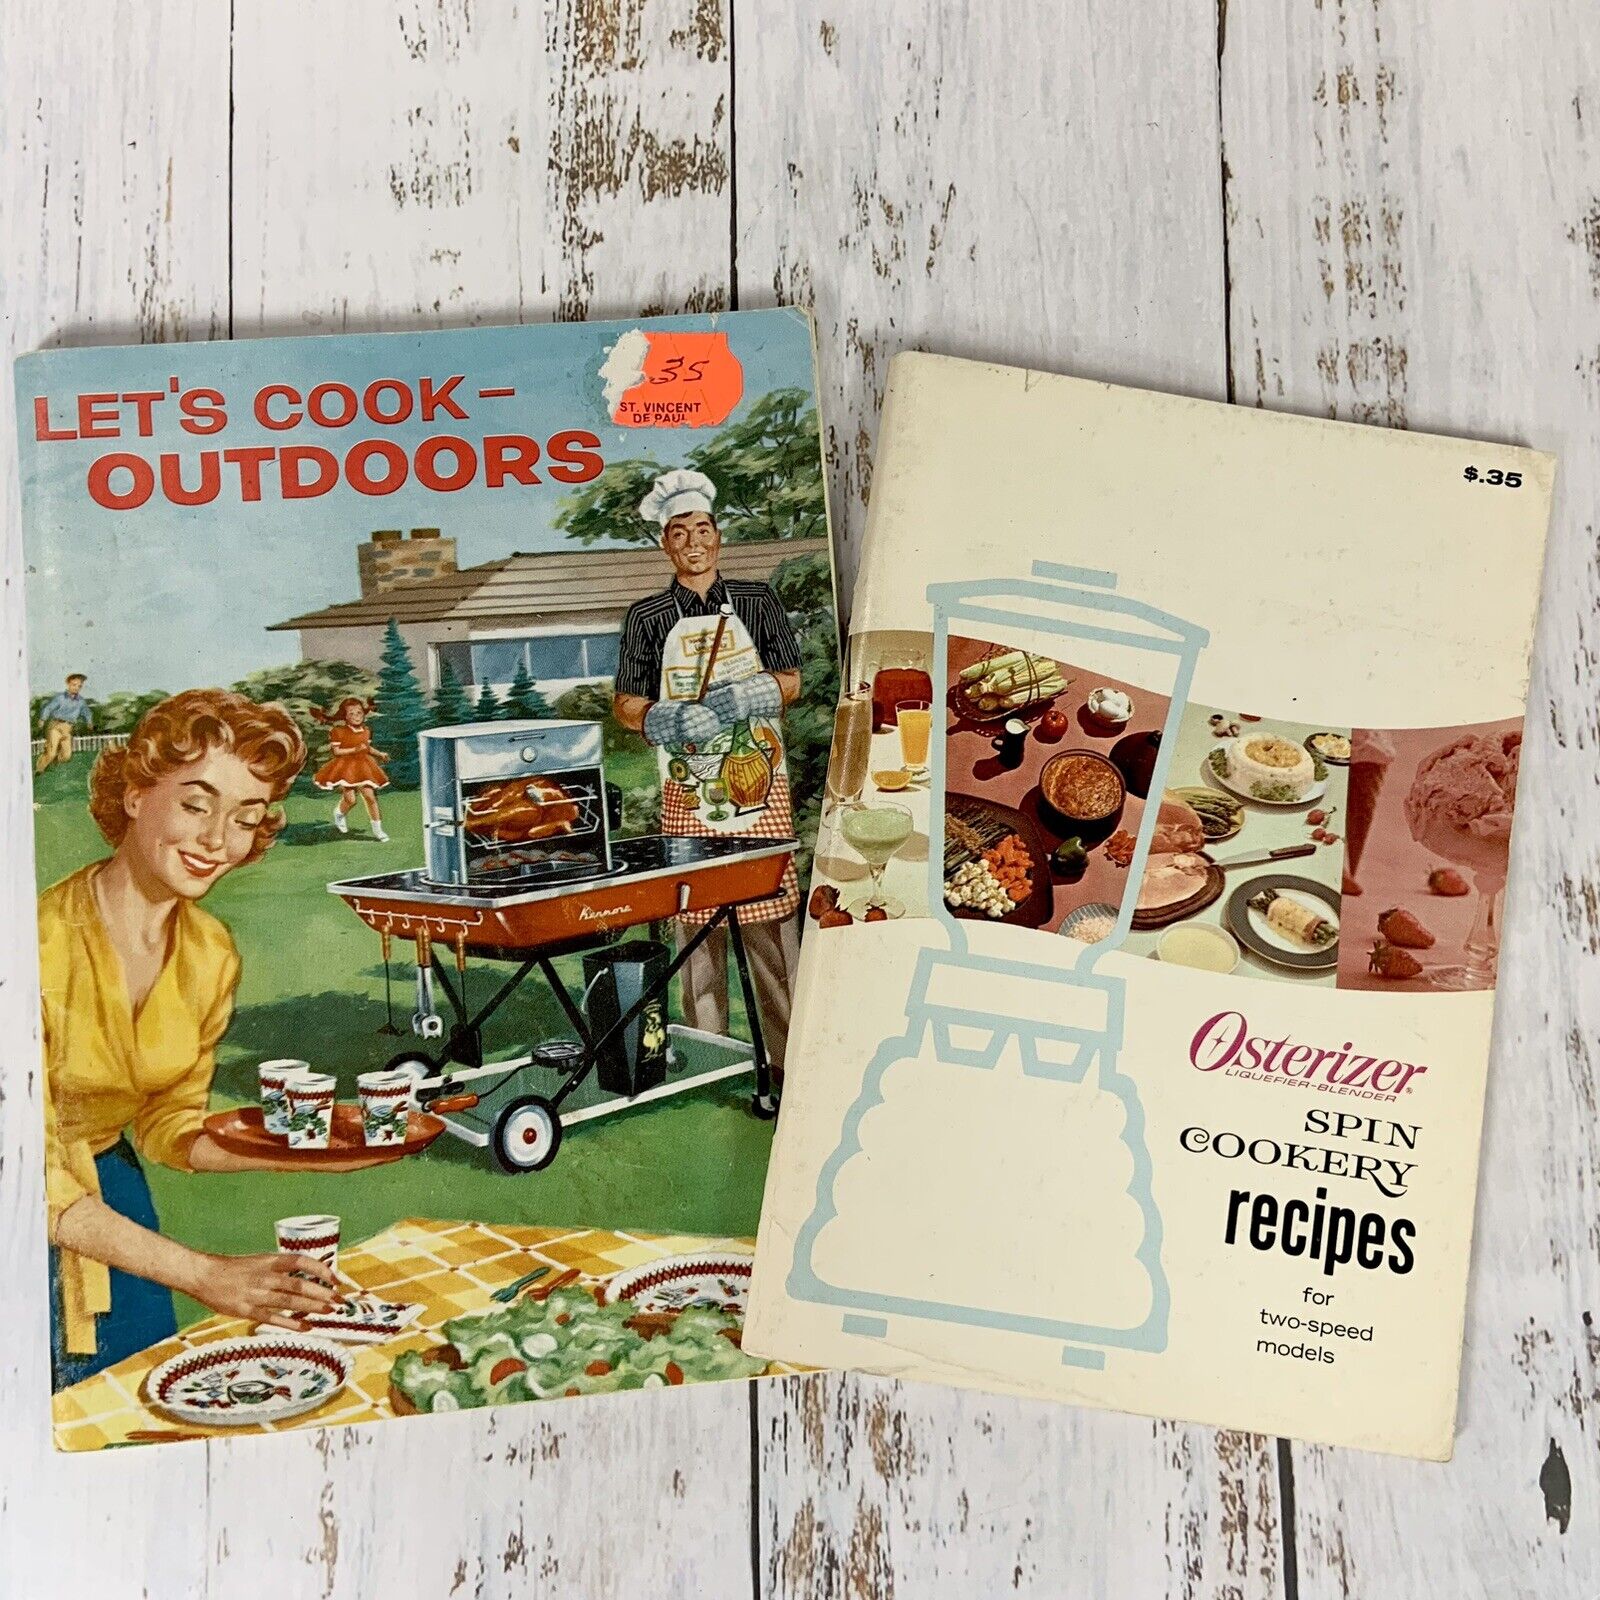 1959 LET\'S COOK OUTDOORS Sears Roebuck & Co. 63 Pages| OSTERIZER Recipes 1966